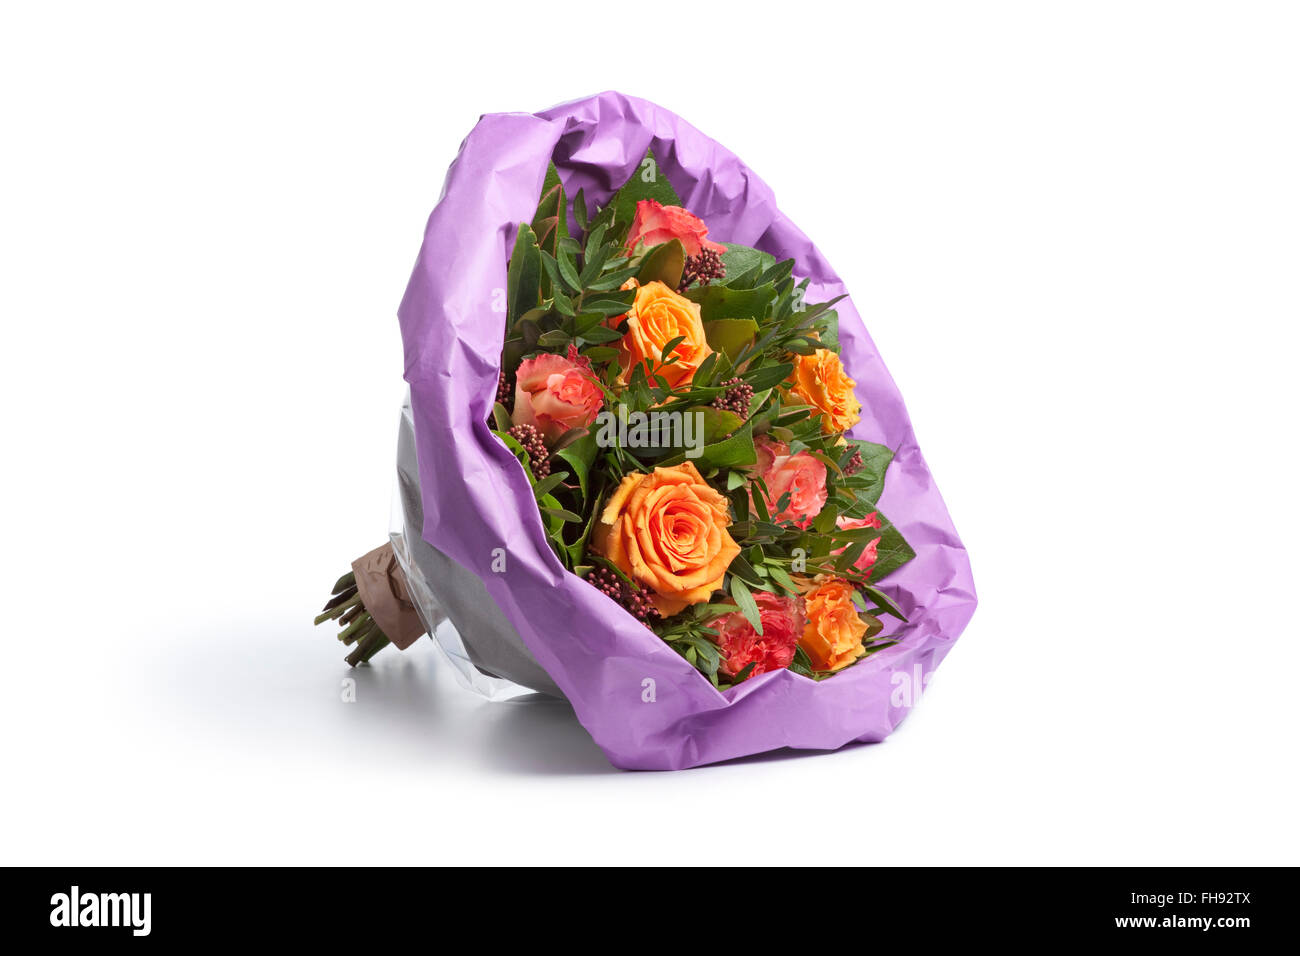 Bouquet of fresh colorful roses on white background Stock Photo